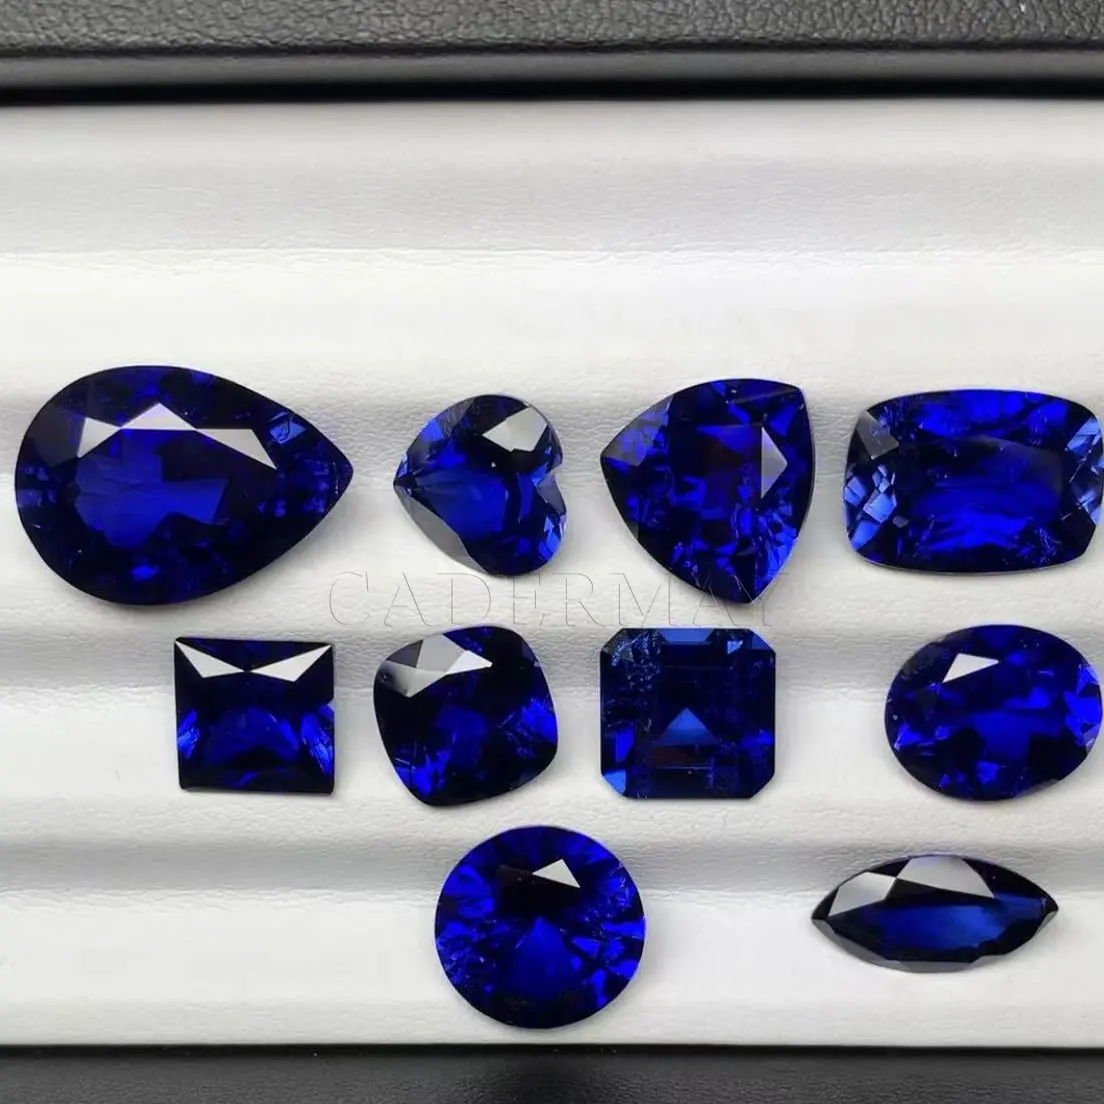 Cadermay 11 Shapes Lab Grown Sapphire Loose Synthetic Gemstones with Minor and Inclusions for Jewelry Making